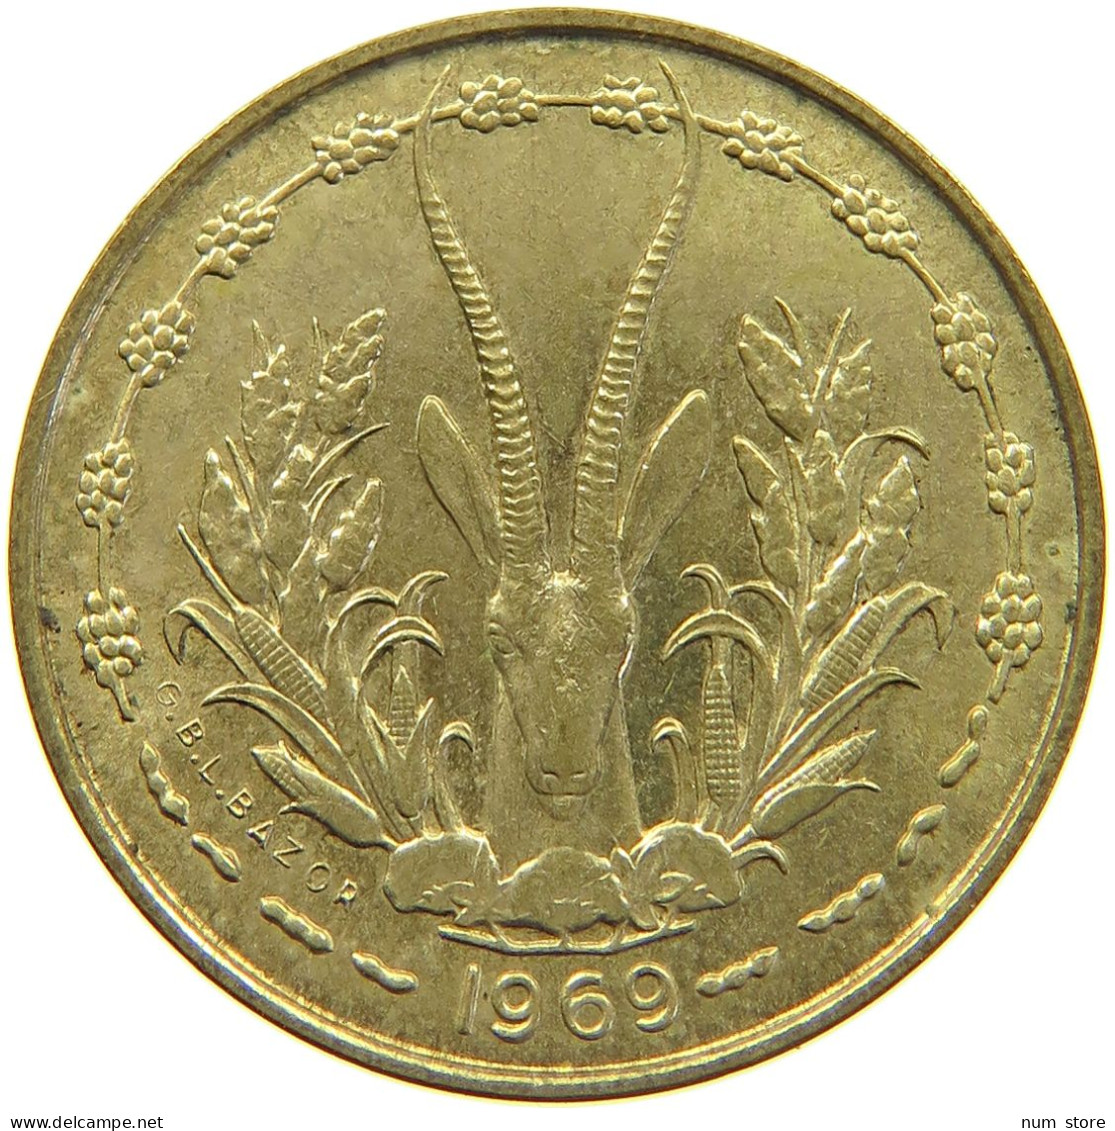 FRENCH WEST AFRICA 5 FRANCS 1969  #c037 0227 - French West Africa